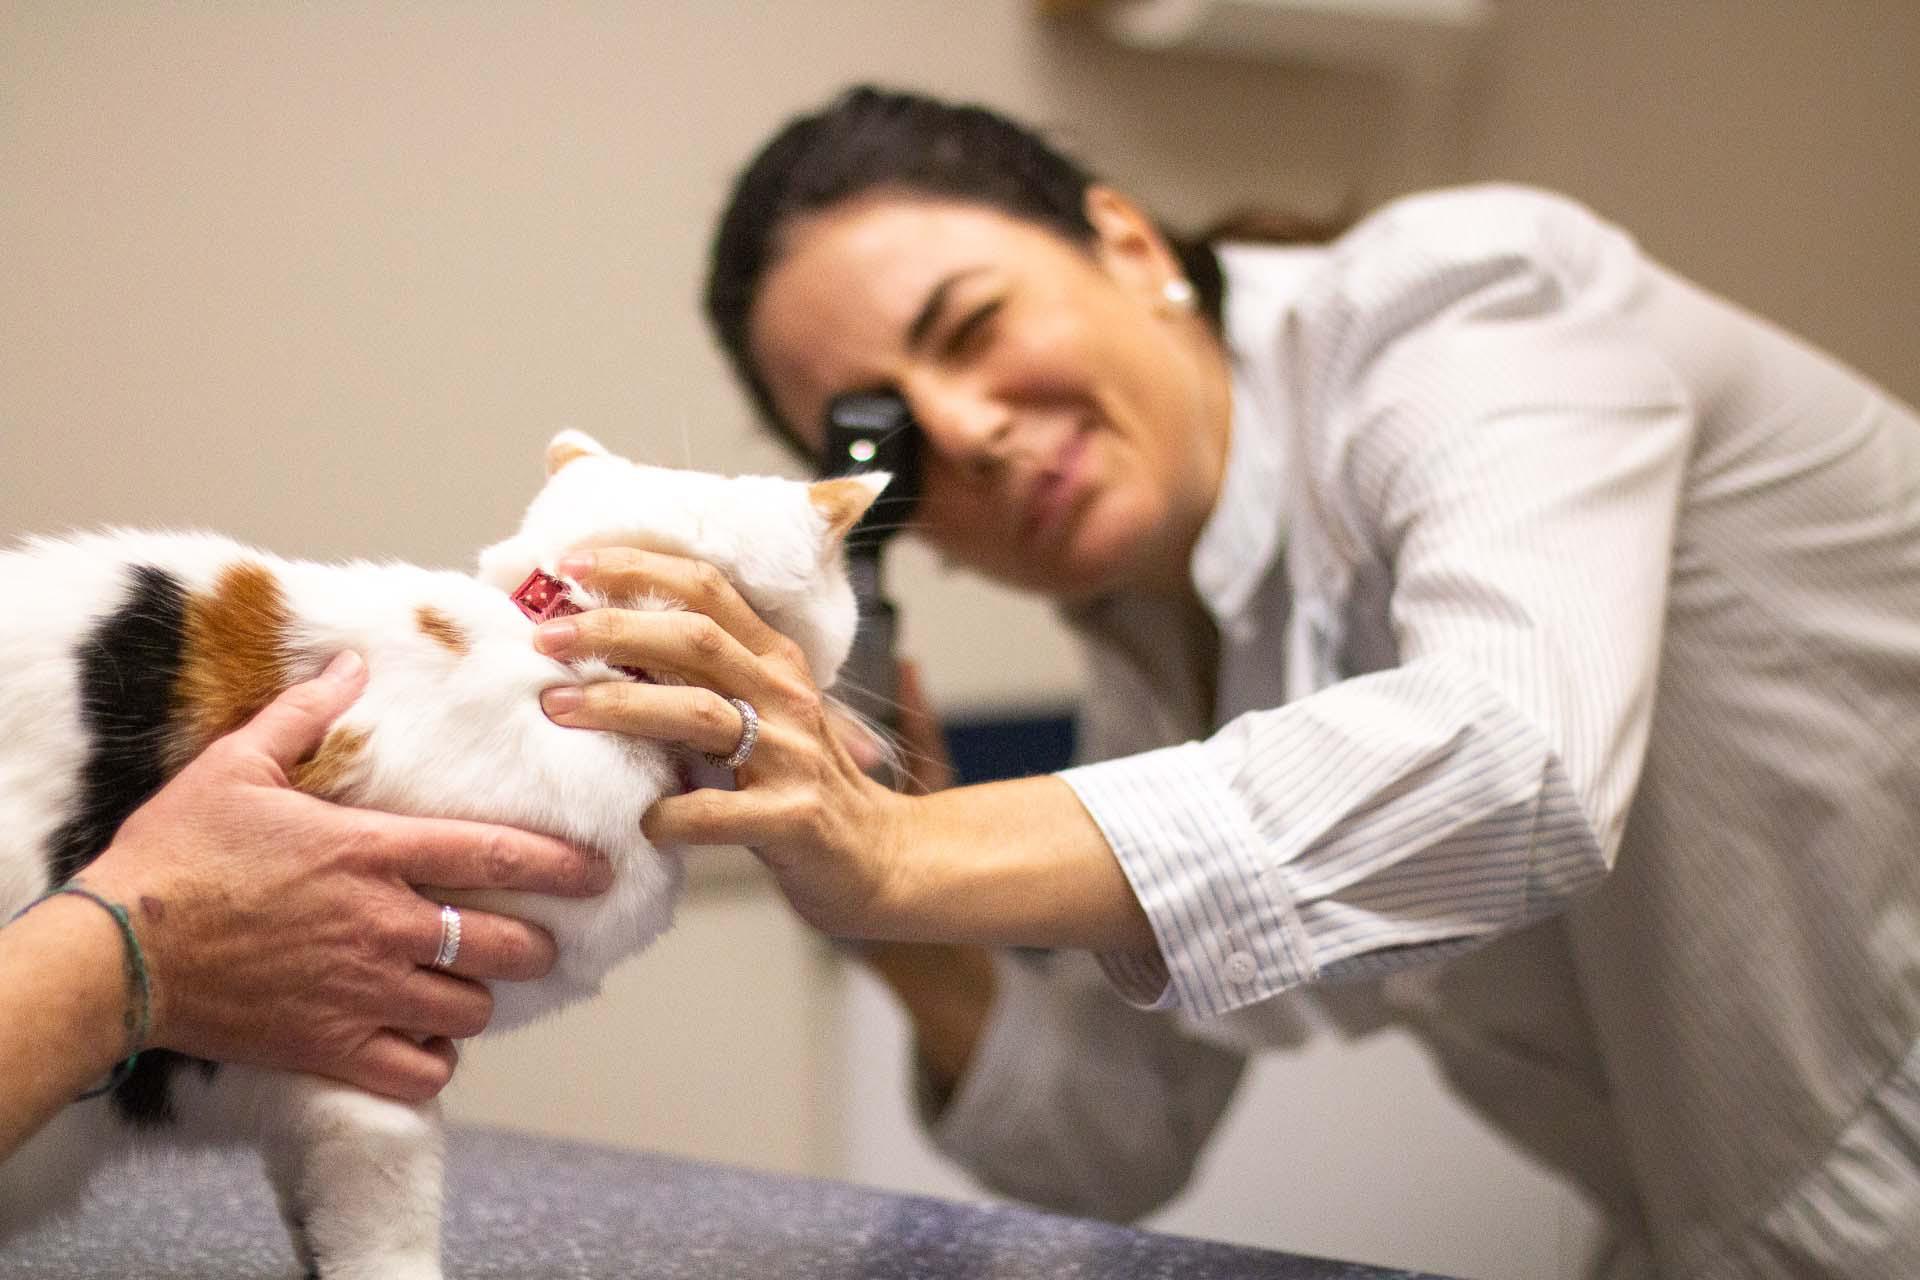 Another part of you pet’s physical exam includes checking the eyes for unusual coloration, discharge, proper light response, and more.